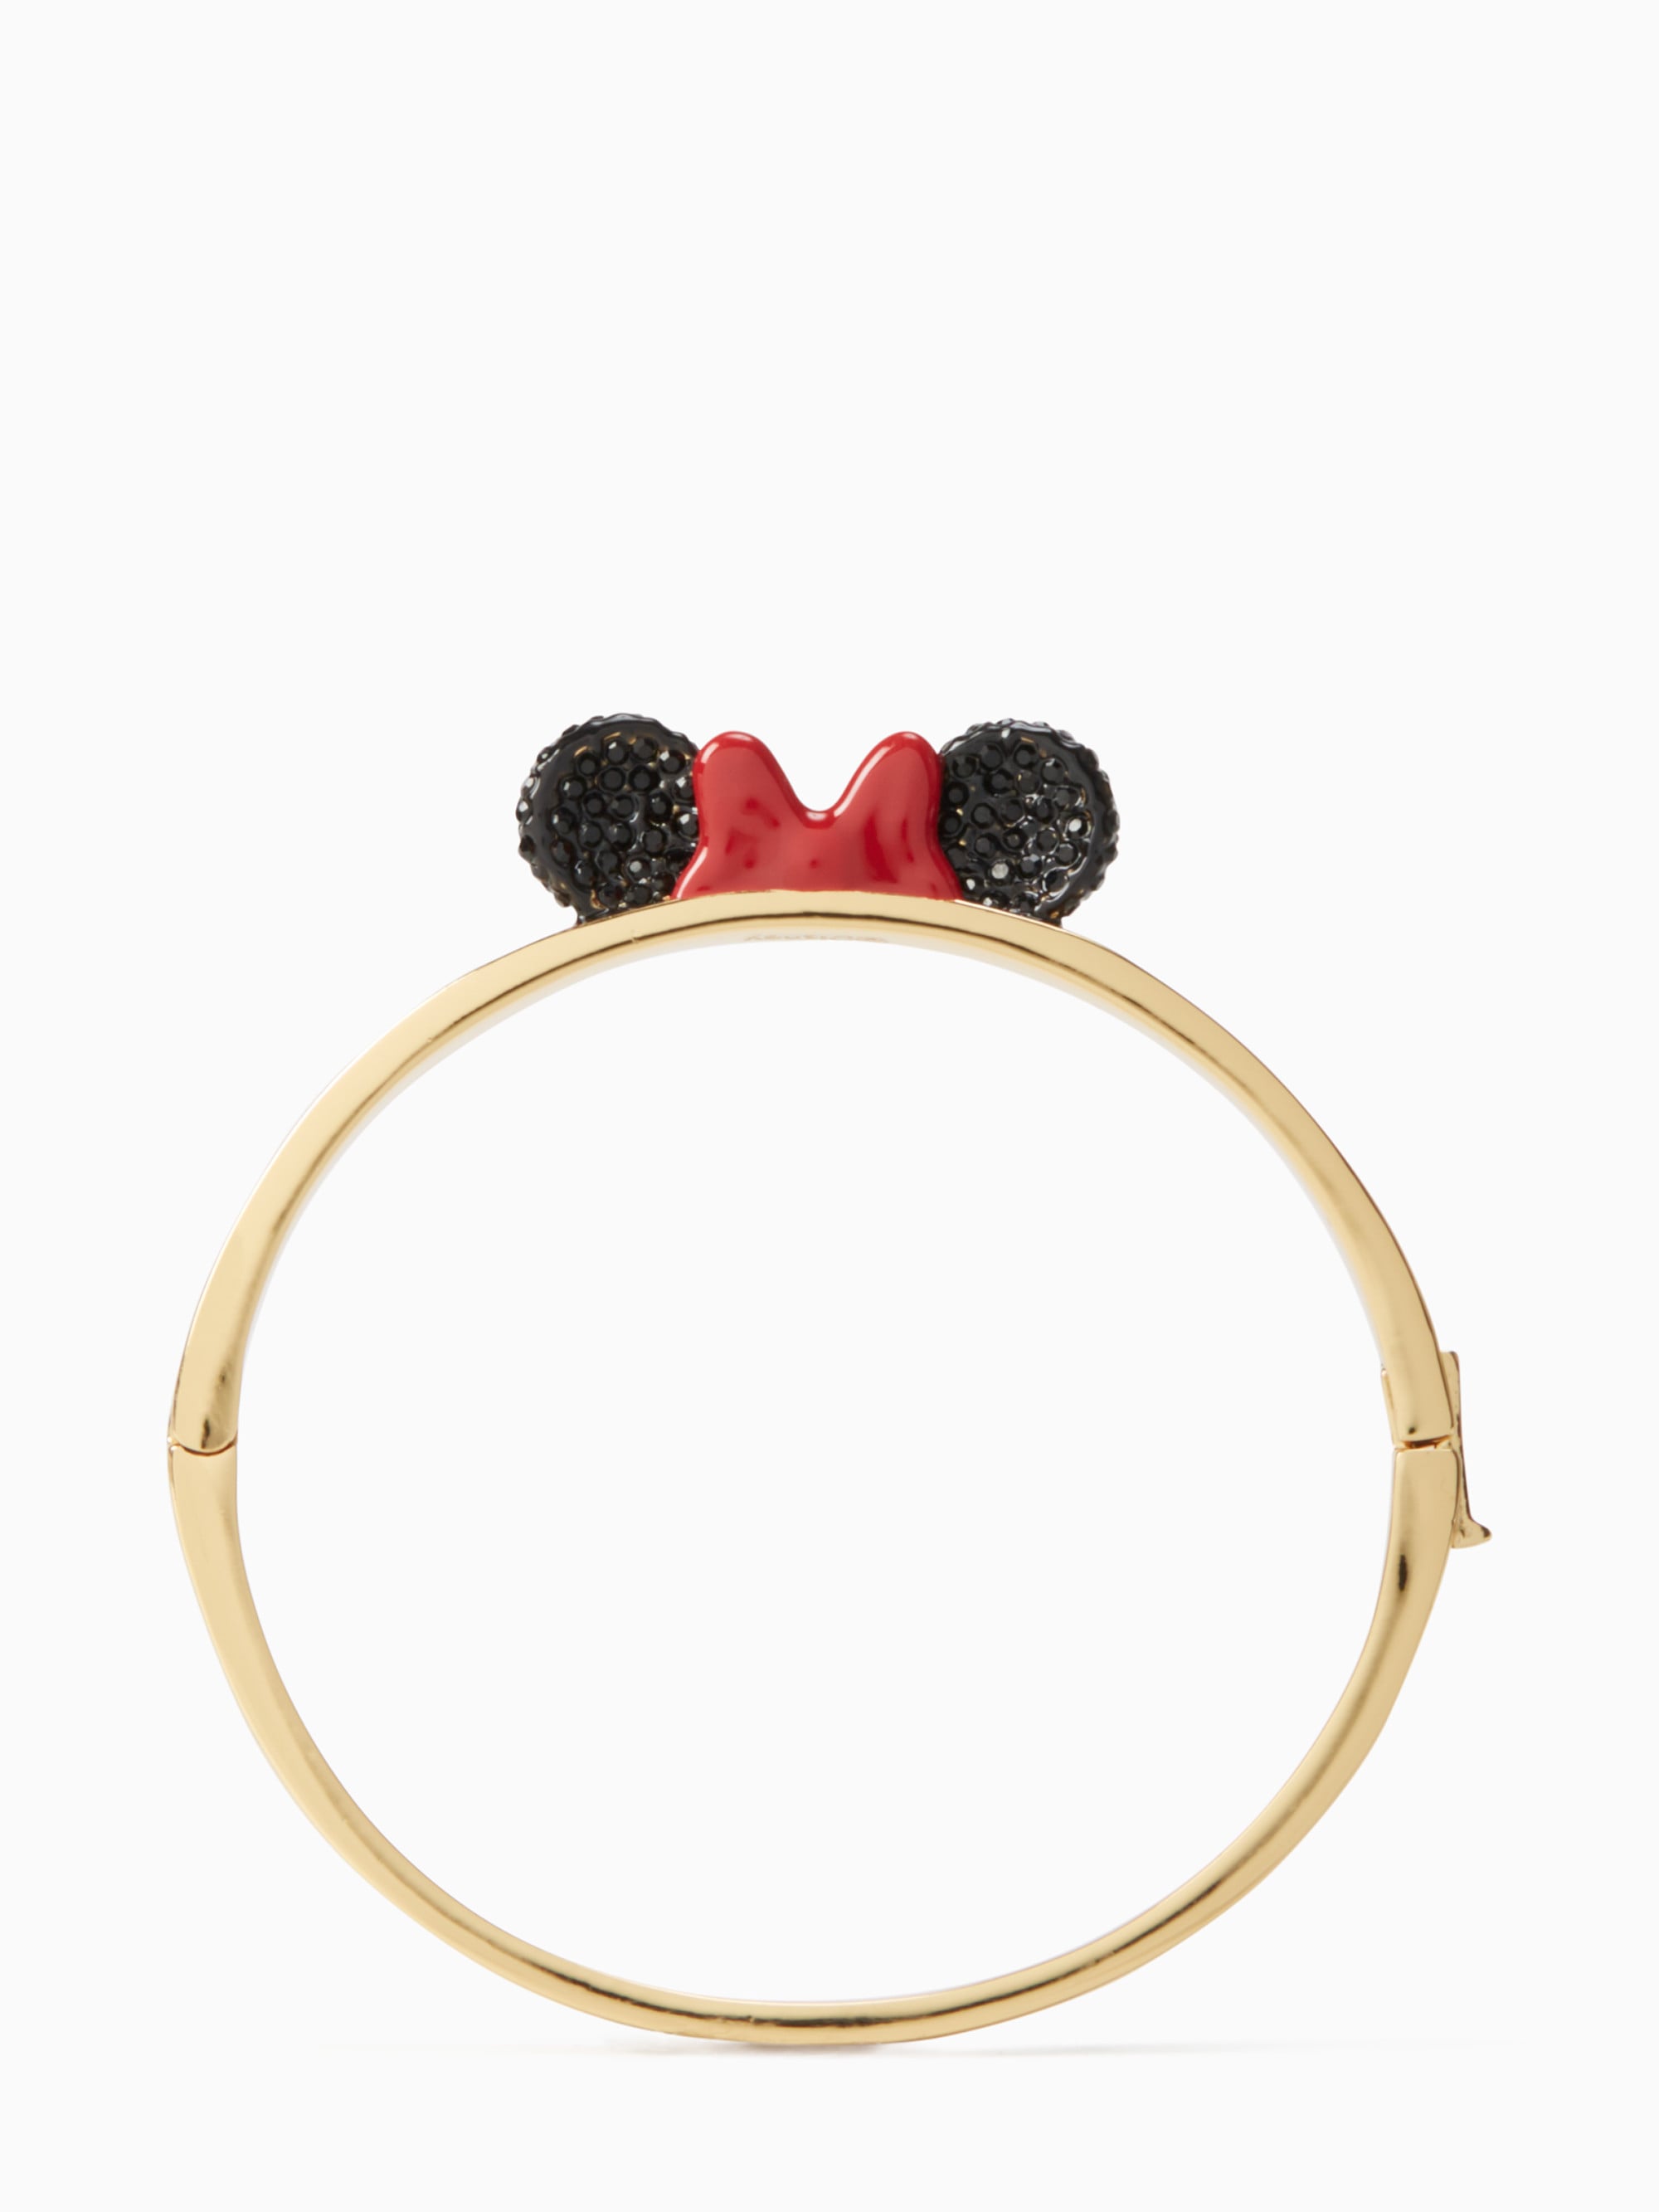 Kate Spade for Minnie Mouse Bangle | We Really Want Everything From Kate  Spade's New Minnie Mouse Collection | POPSUGAR Fashion Photo 8